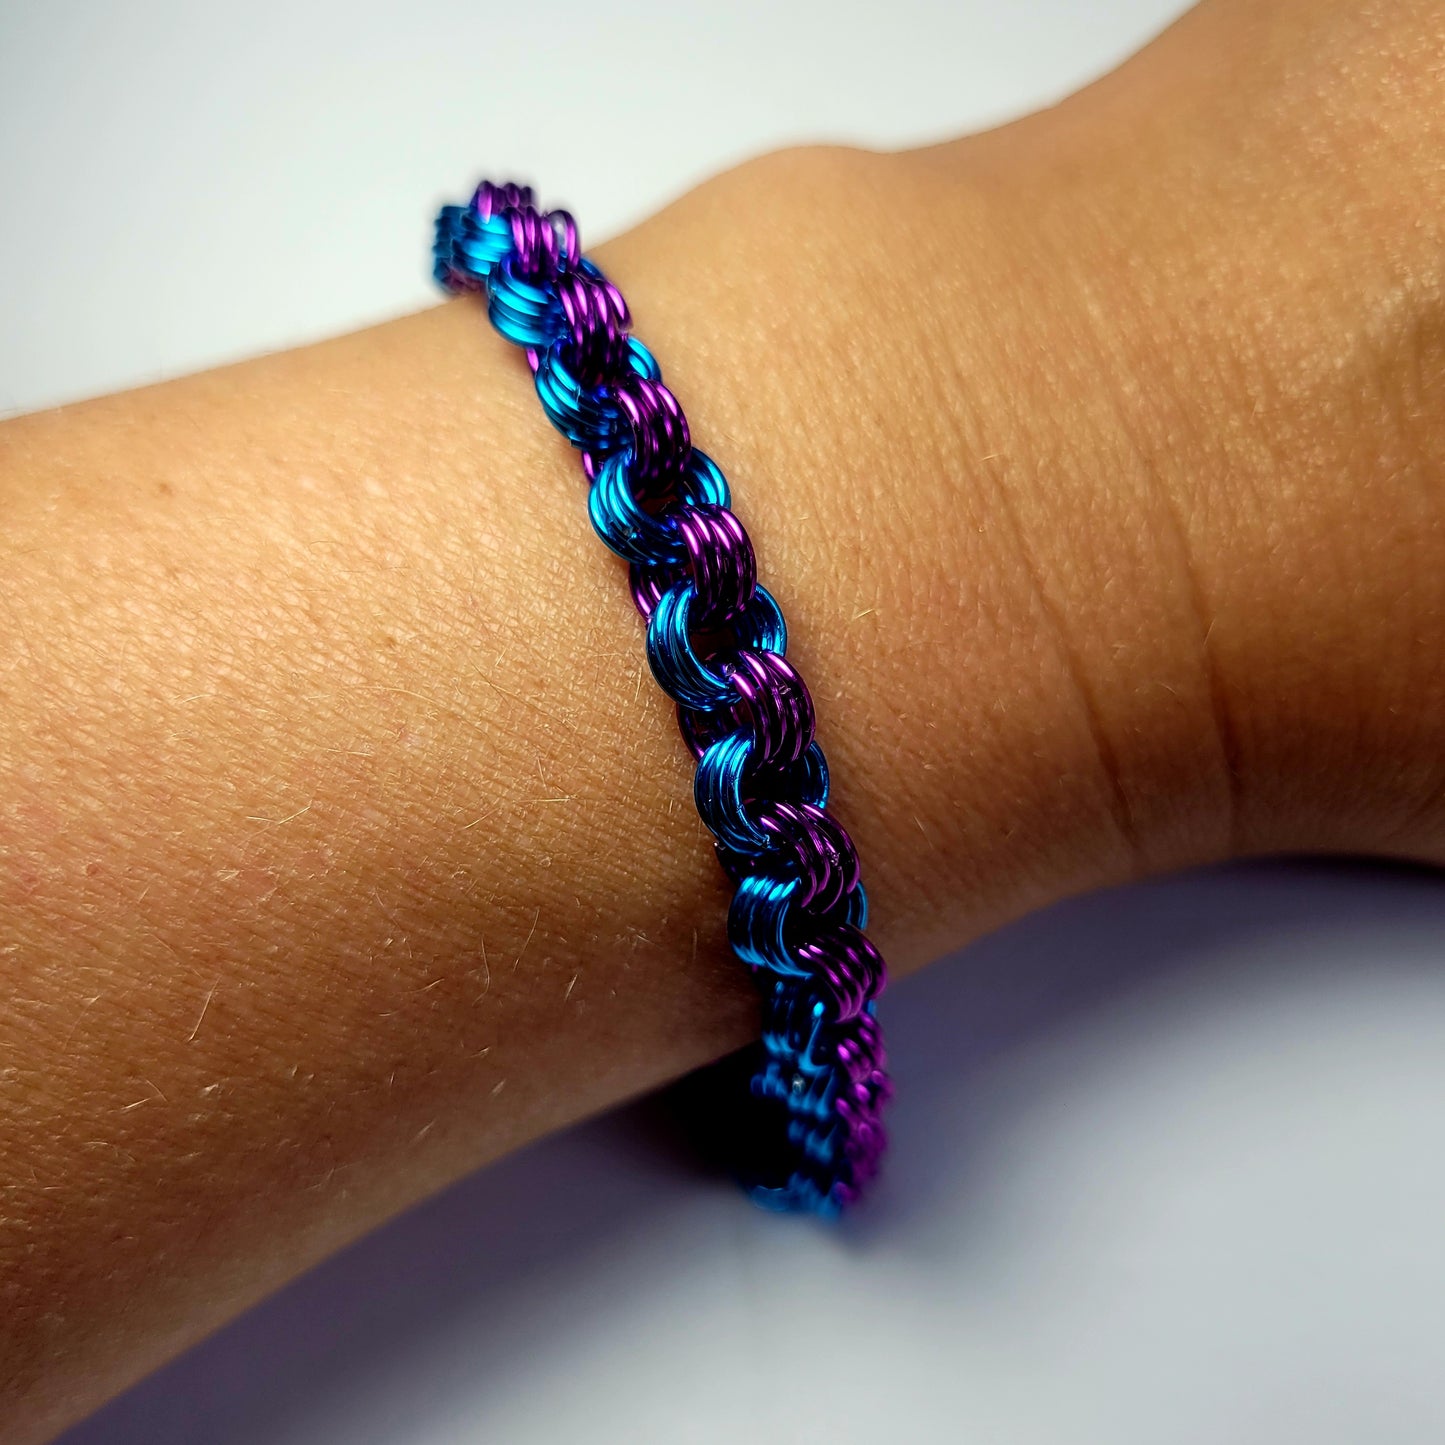 Bracelet, blue and purple chainmail